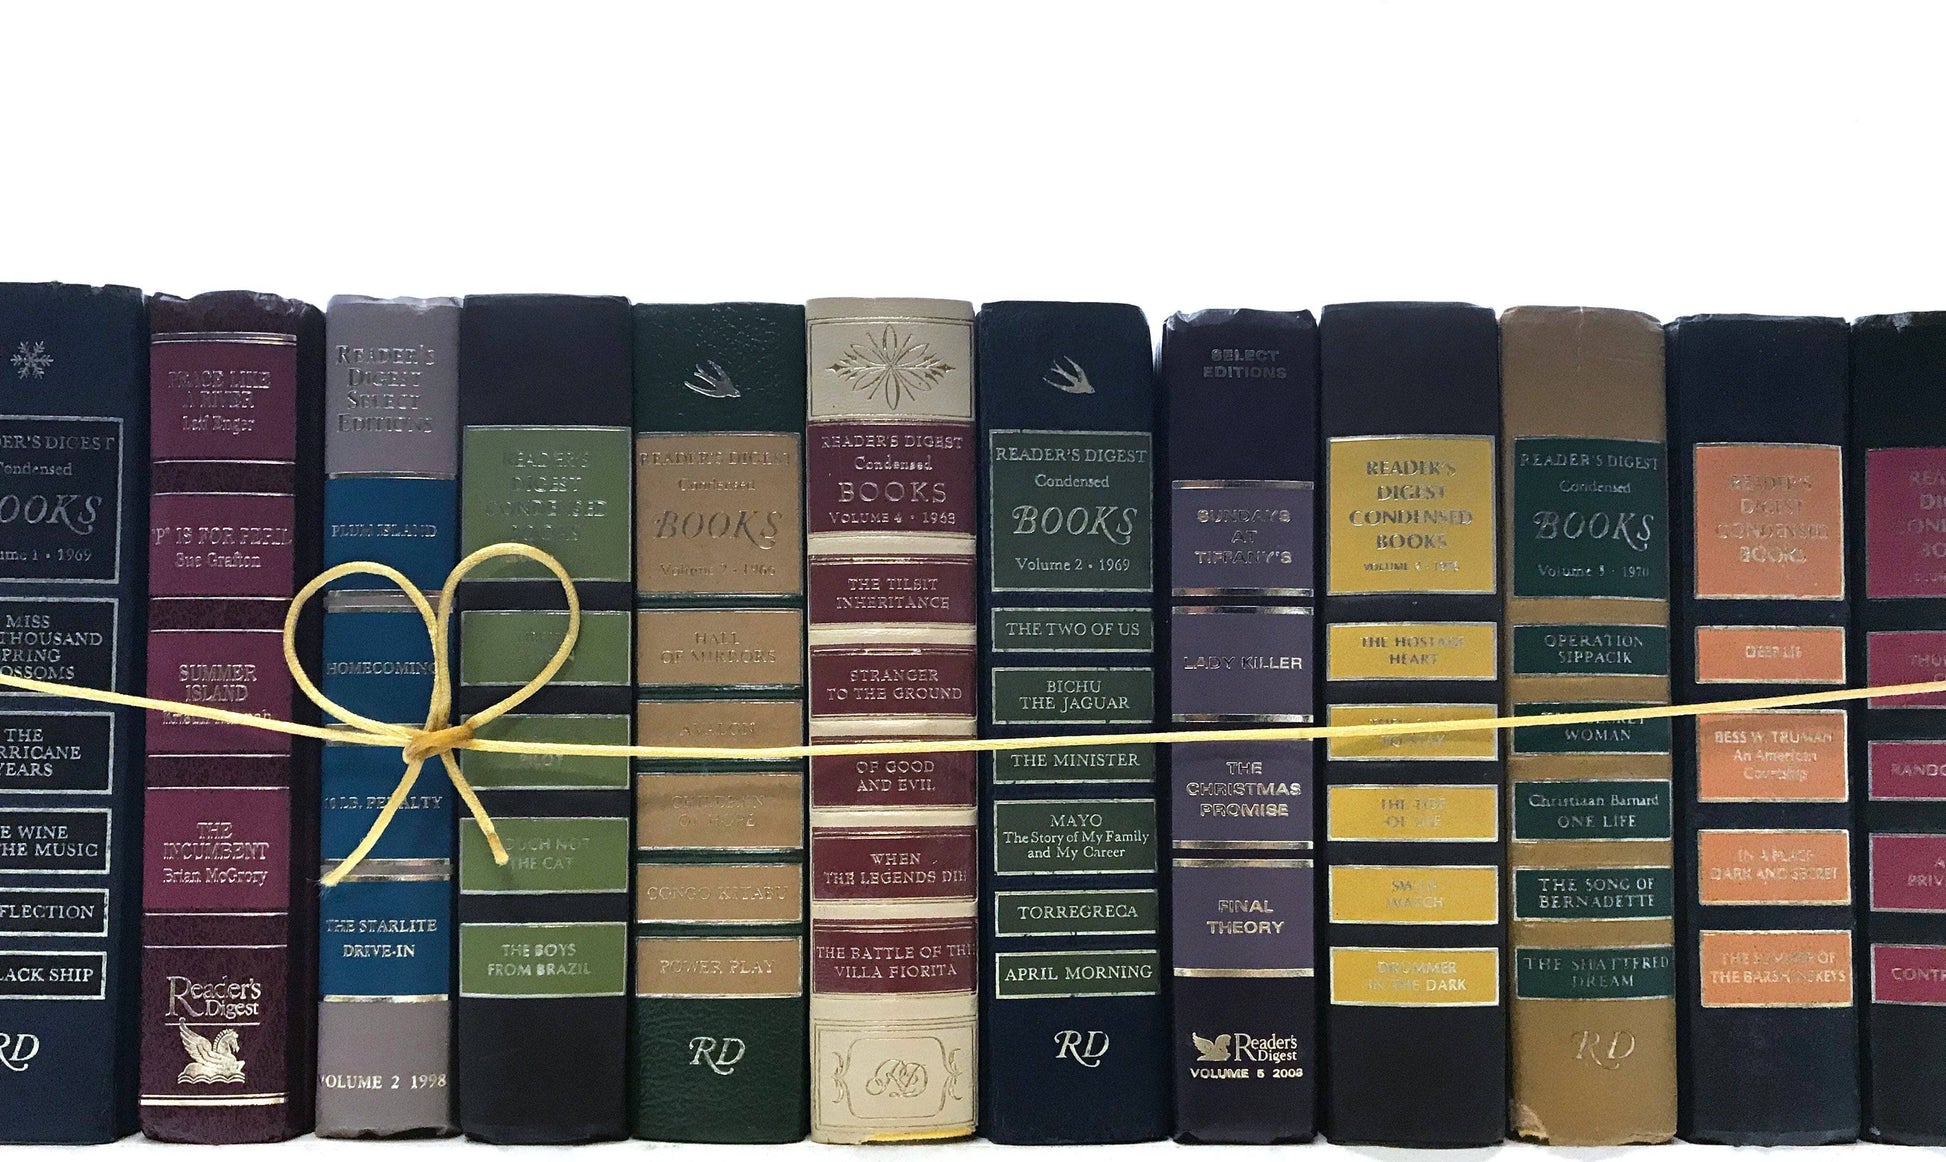 Reader's Digest Condensed Books - what's it like to actually read